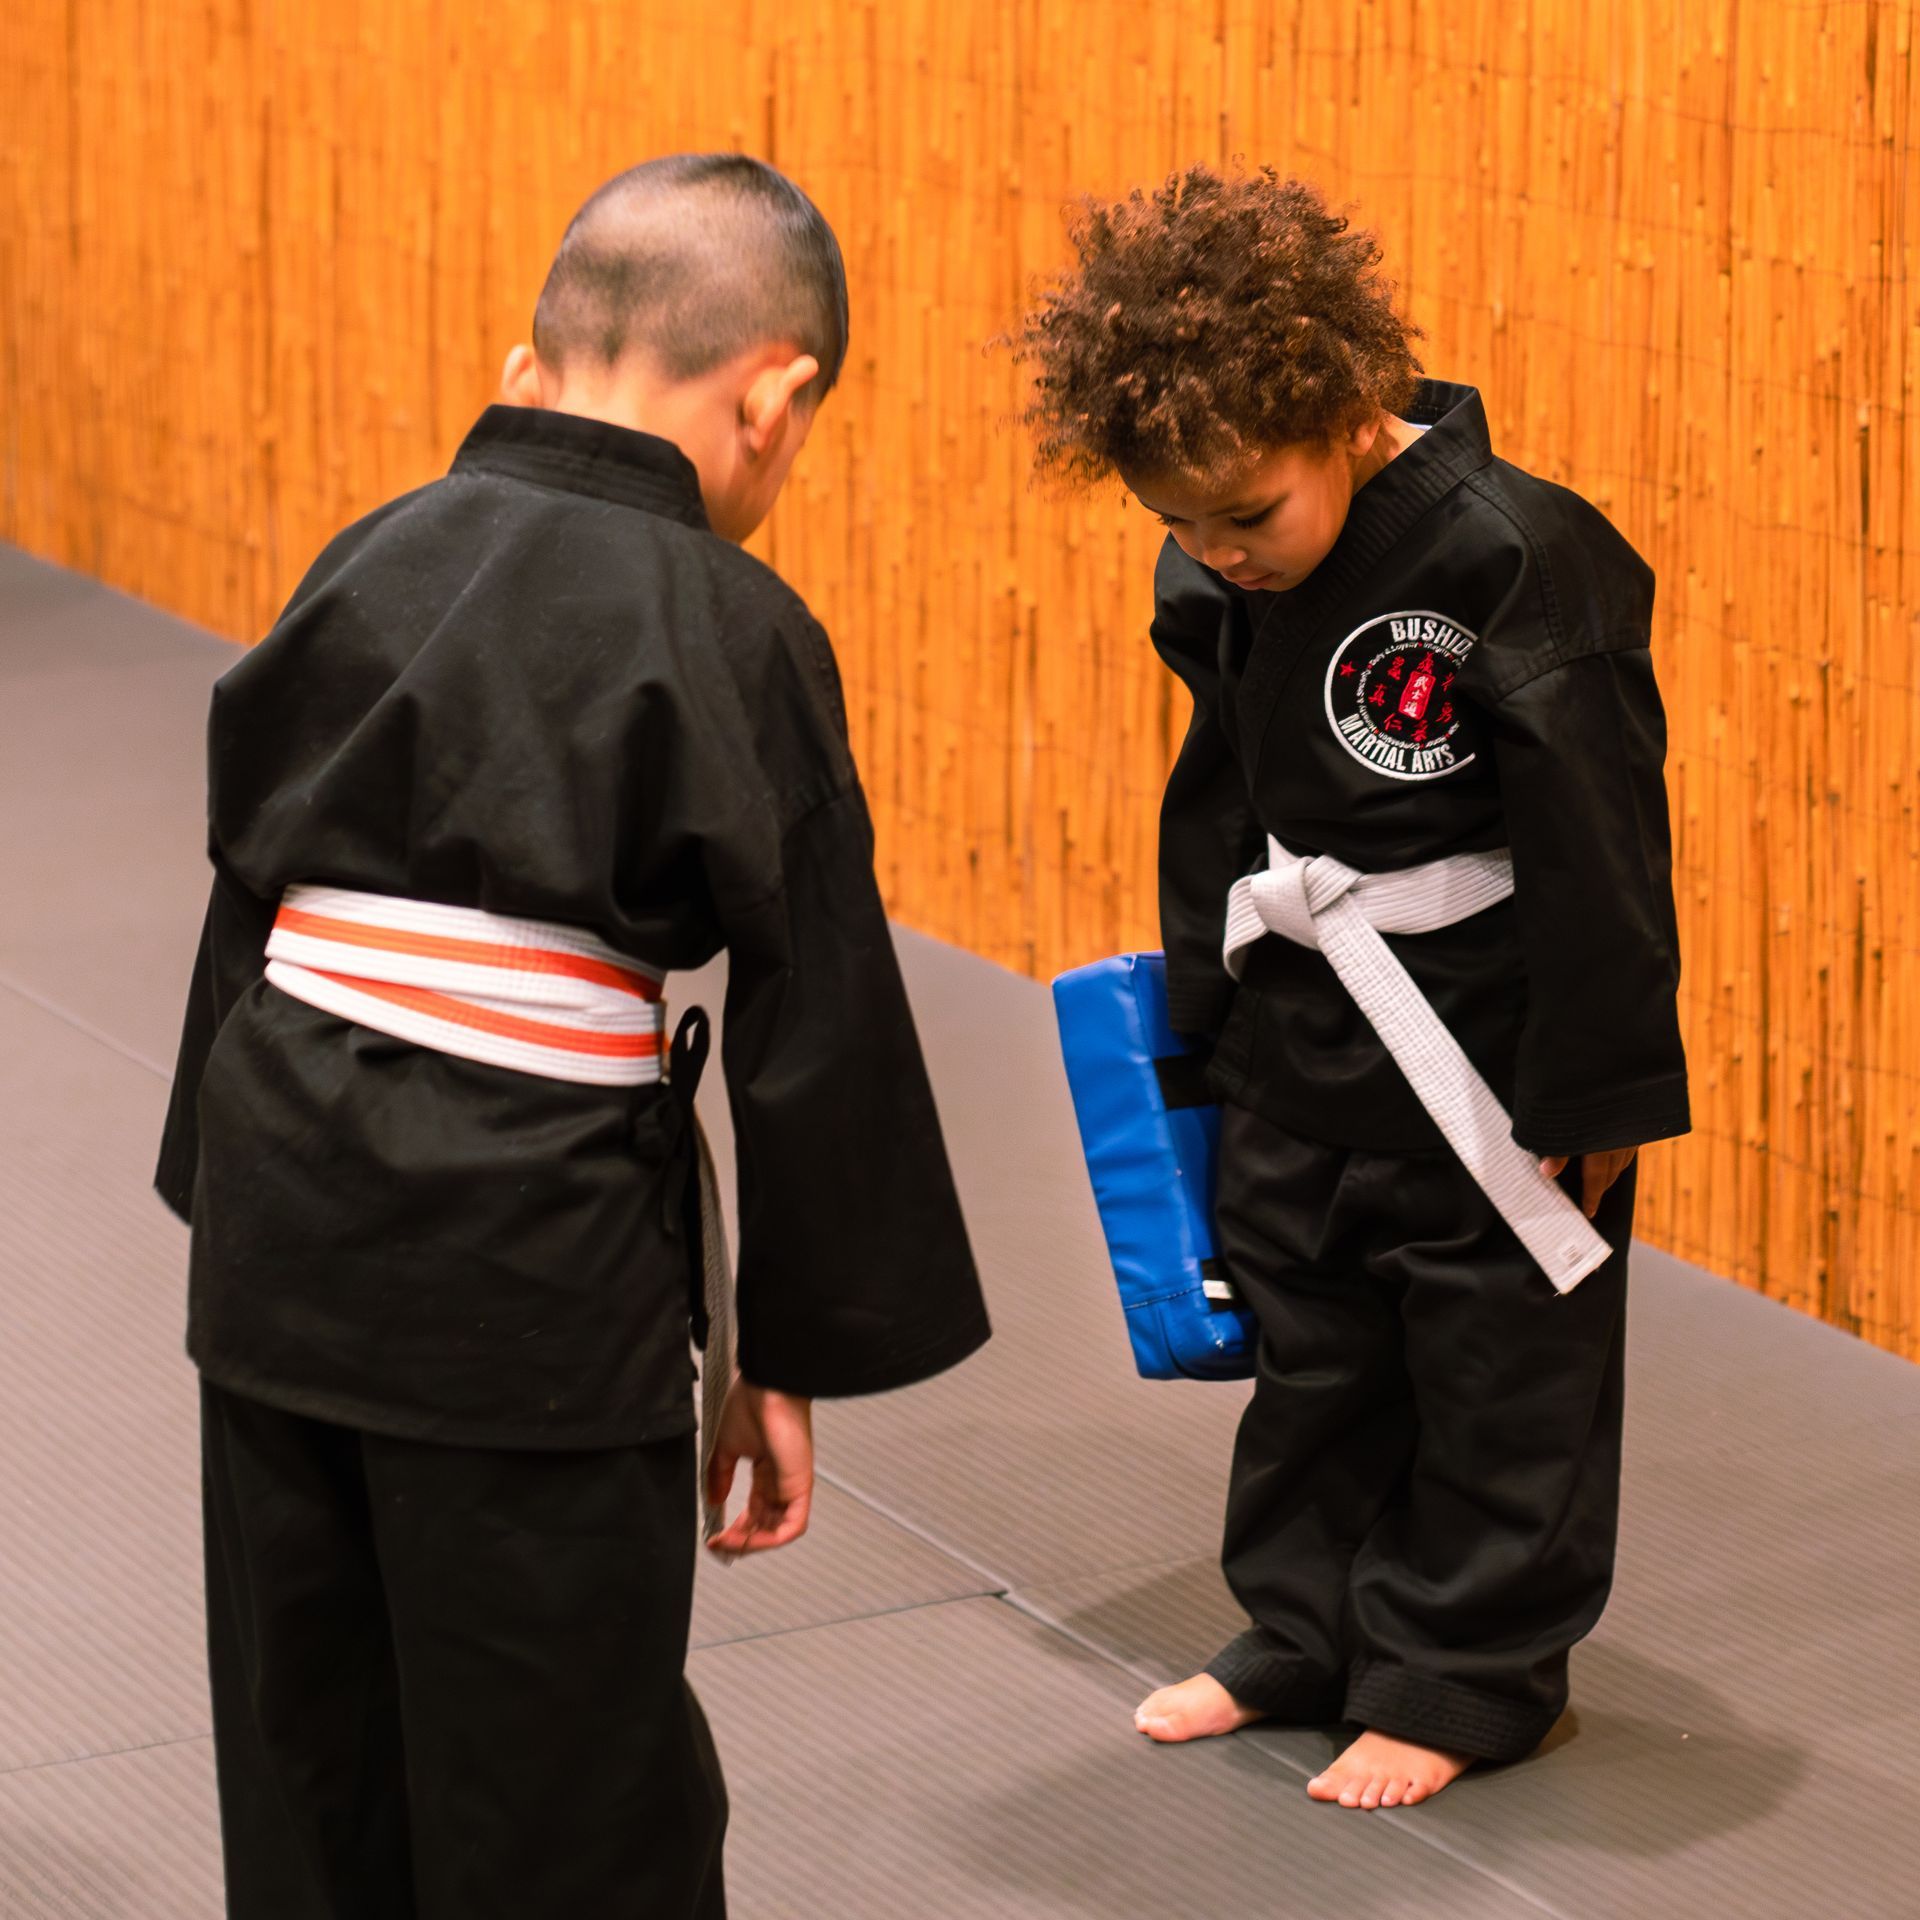 Two young boys in karate uniforms are standing next to each other